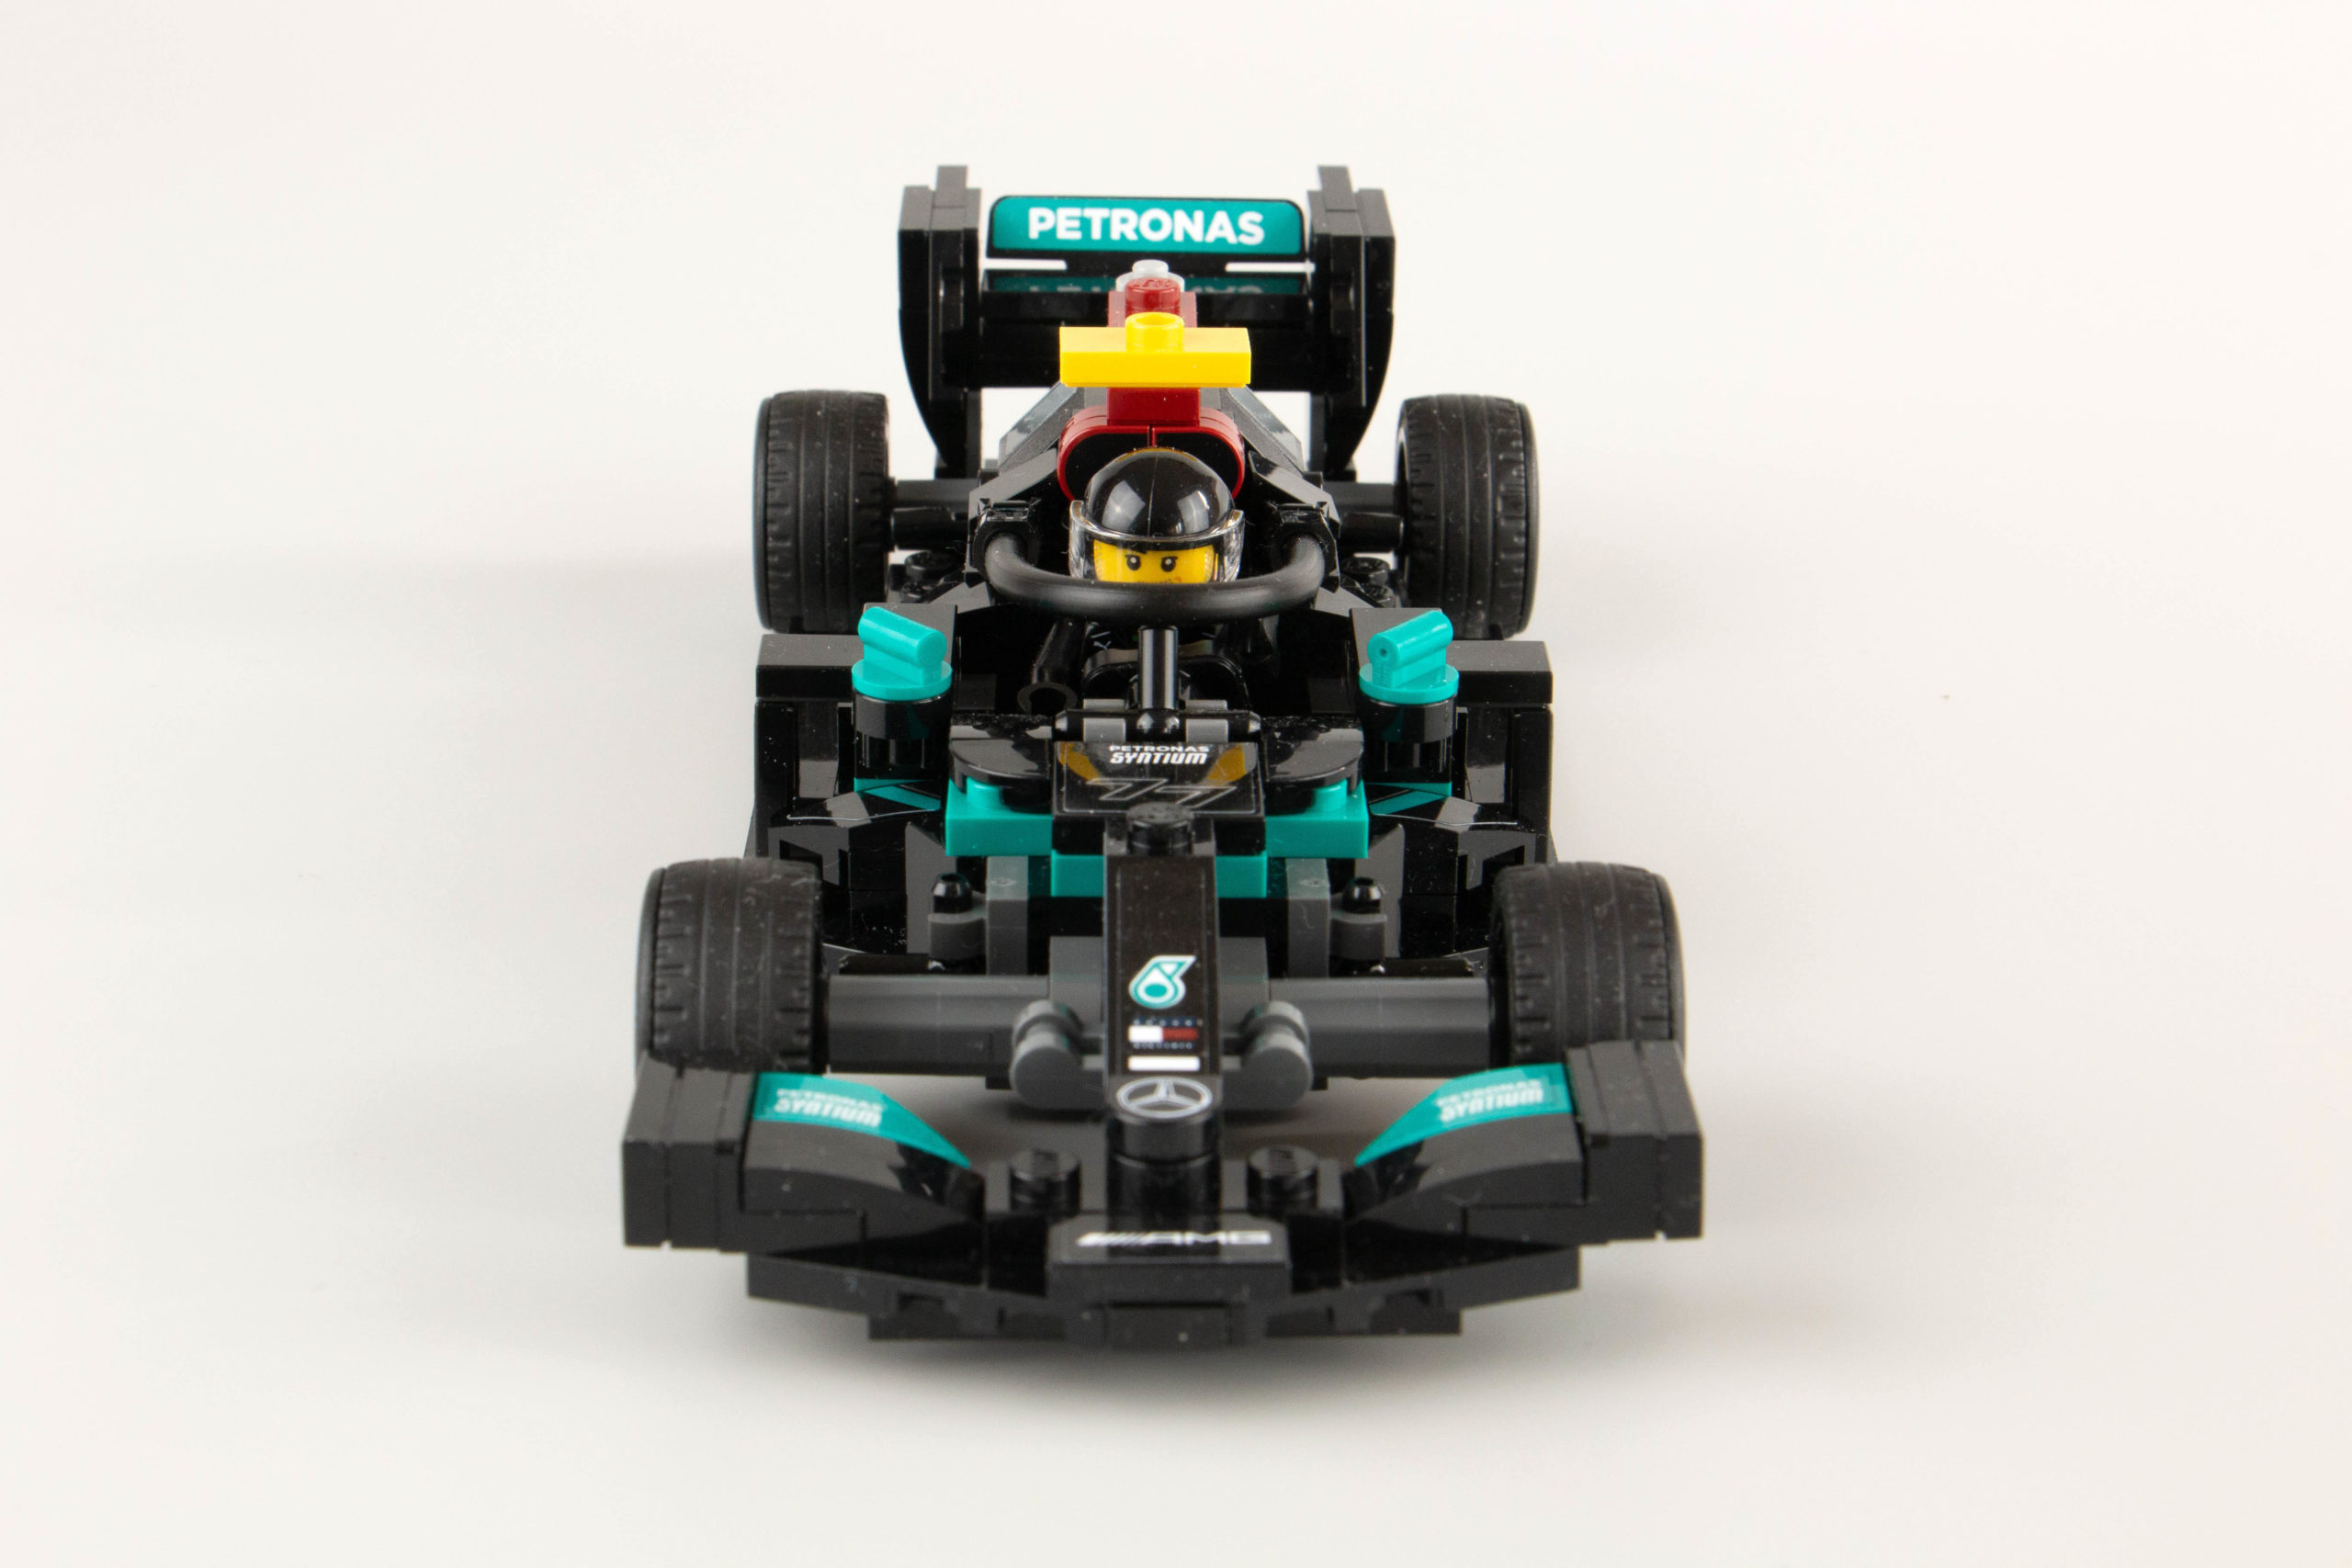 Mercedes F1 car 2022: Lego launch buildable version of Lewis